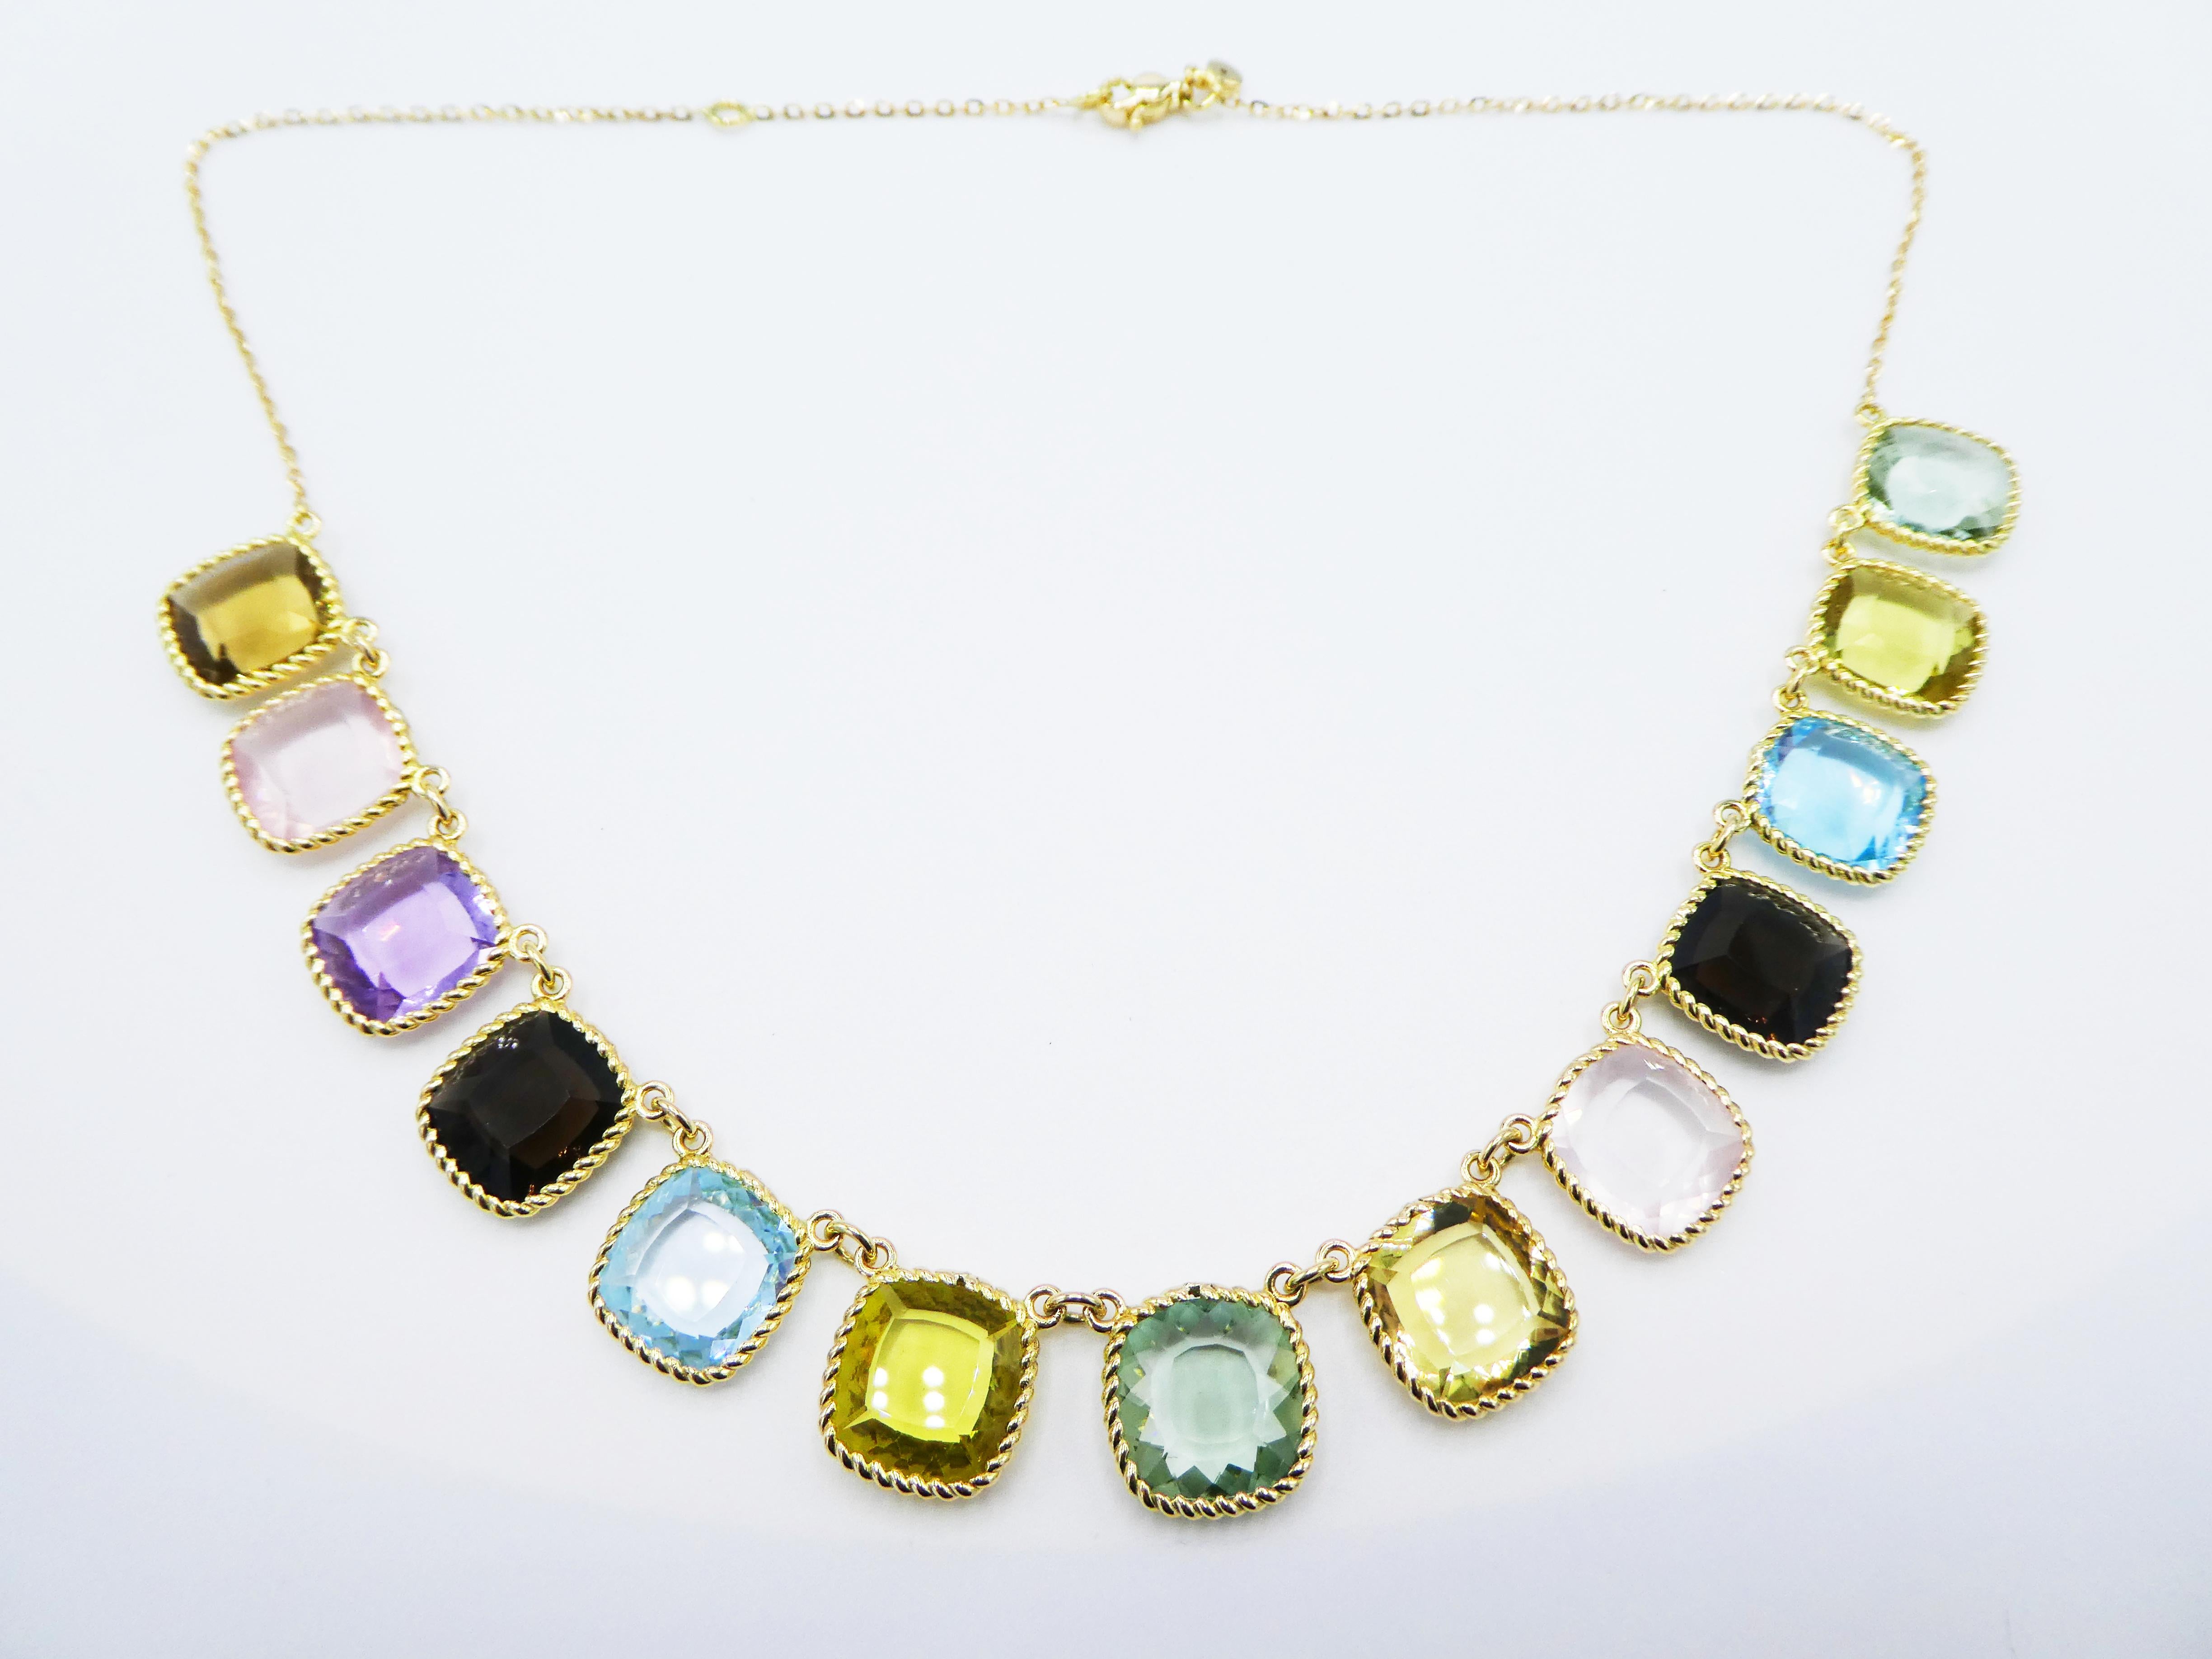 Roberto Coin Ipanema 18K Yellow Gold Multi-Colored Gemstone Necklace

Metal: 18k yellow gold
Weight: 26.44 grams 
Length: 17.5 inches including 1.5 inch extension
Can be adjusted to 16 inches